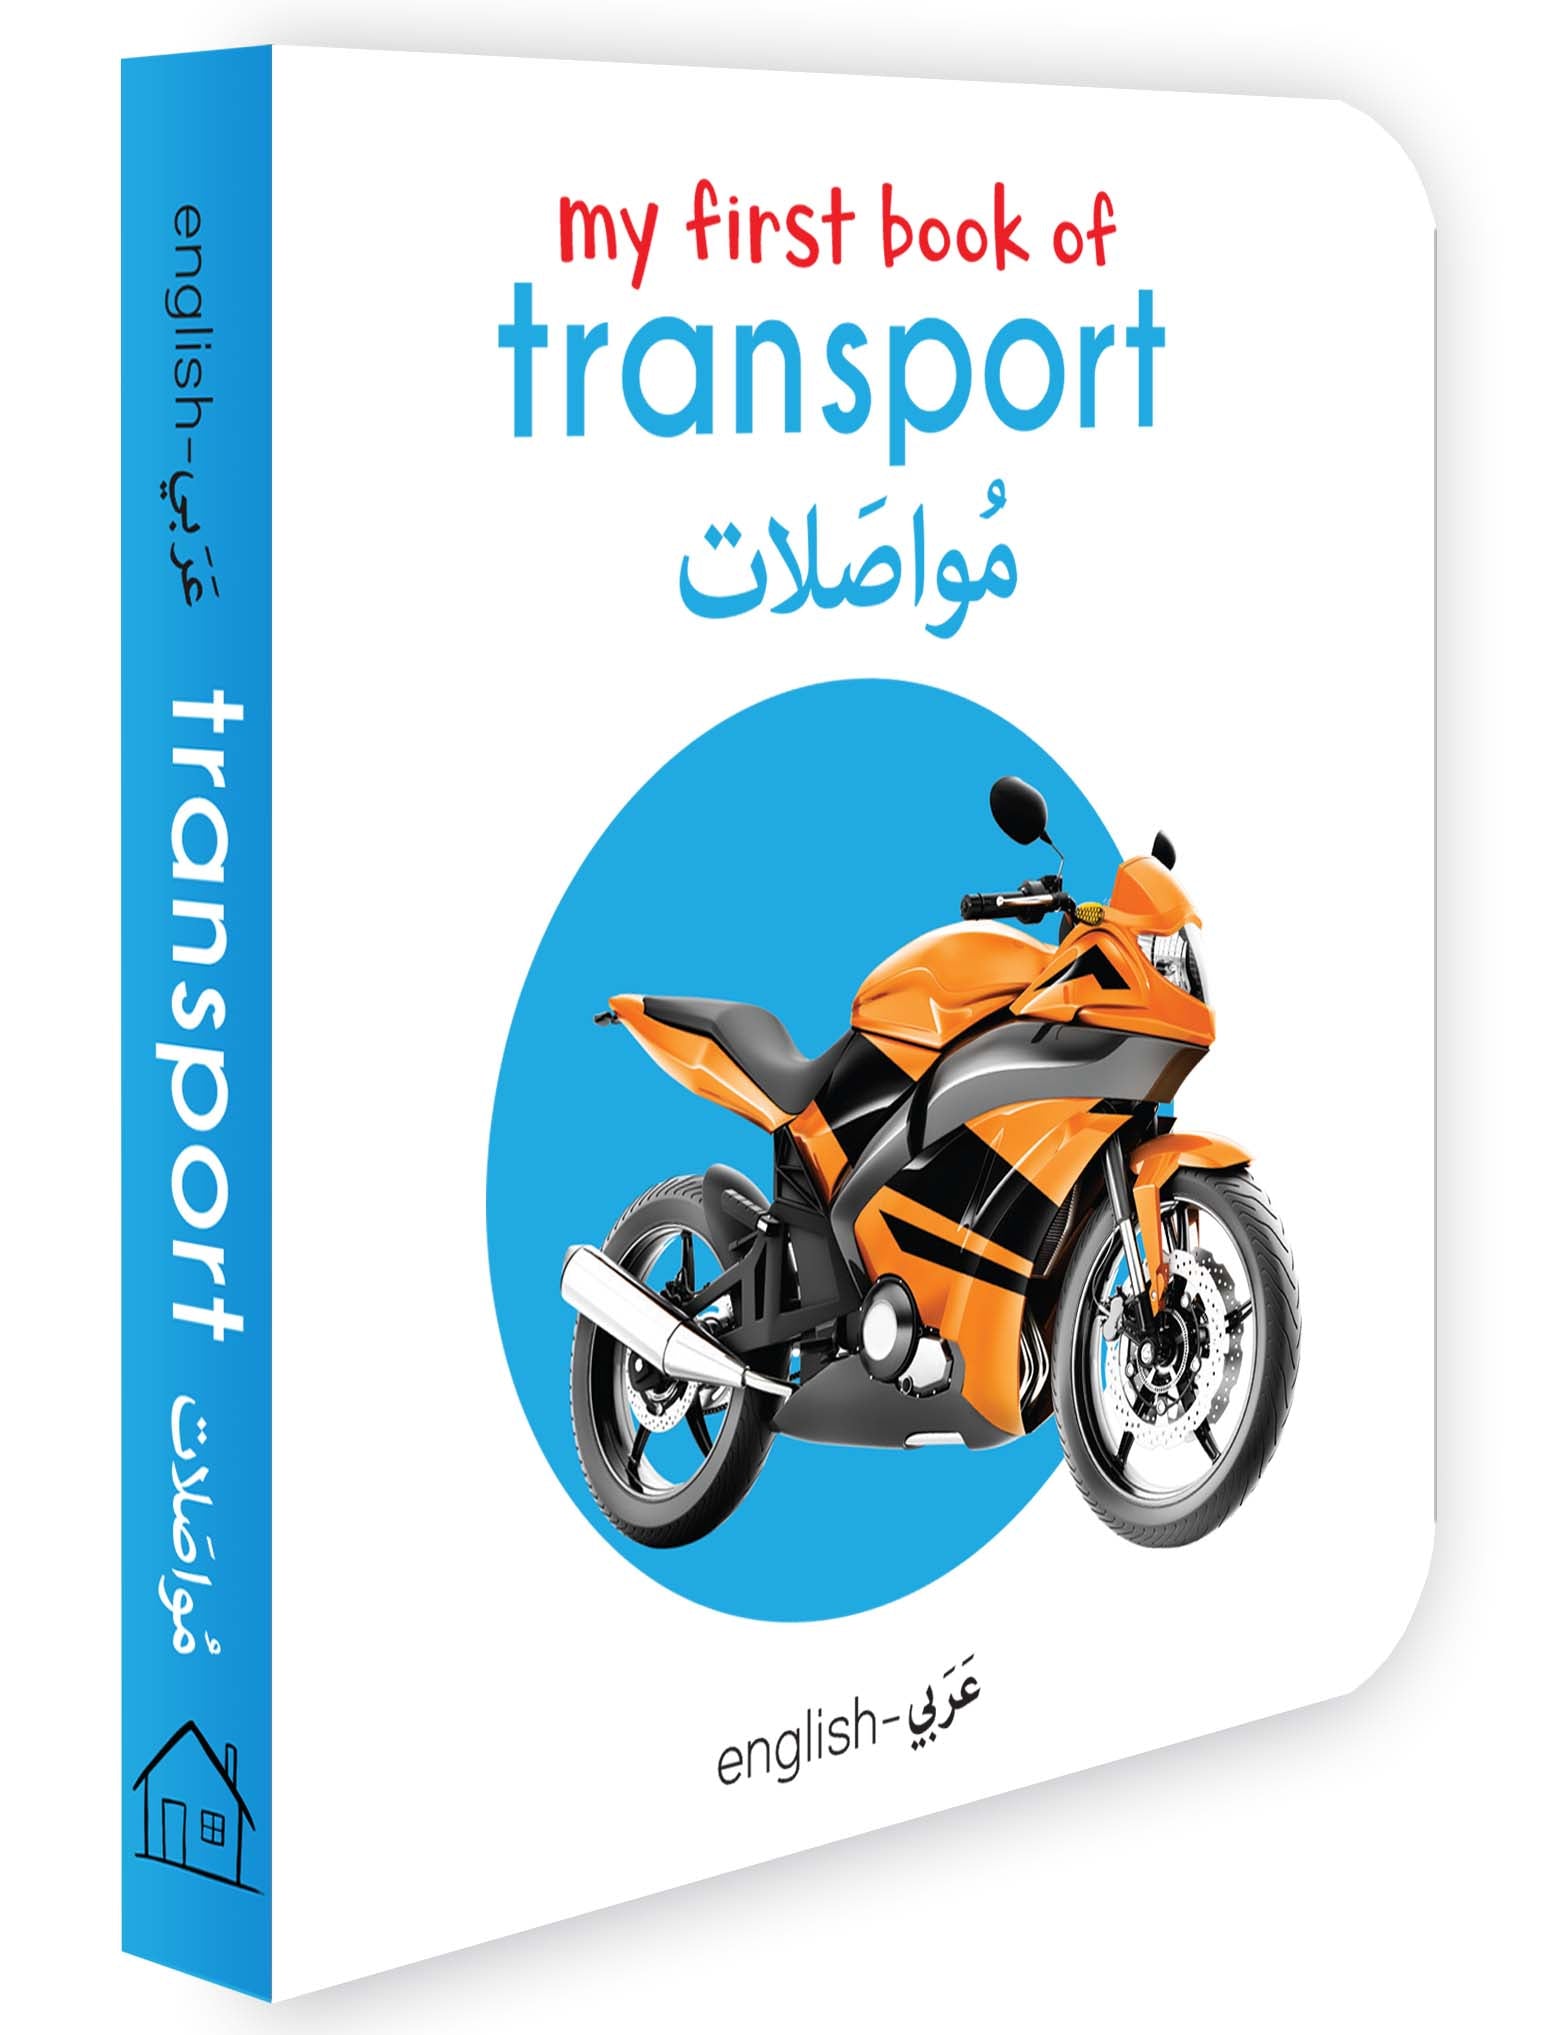 My First Book of Transport (English-Arabic) - Bilingual Learning Library